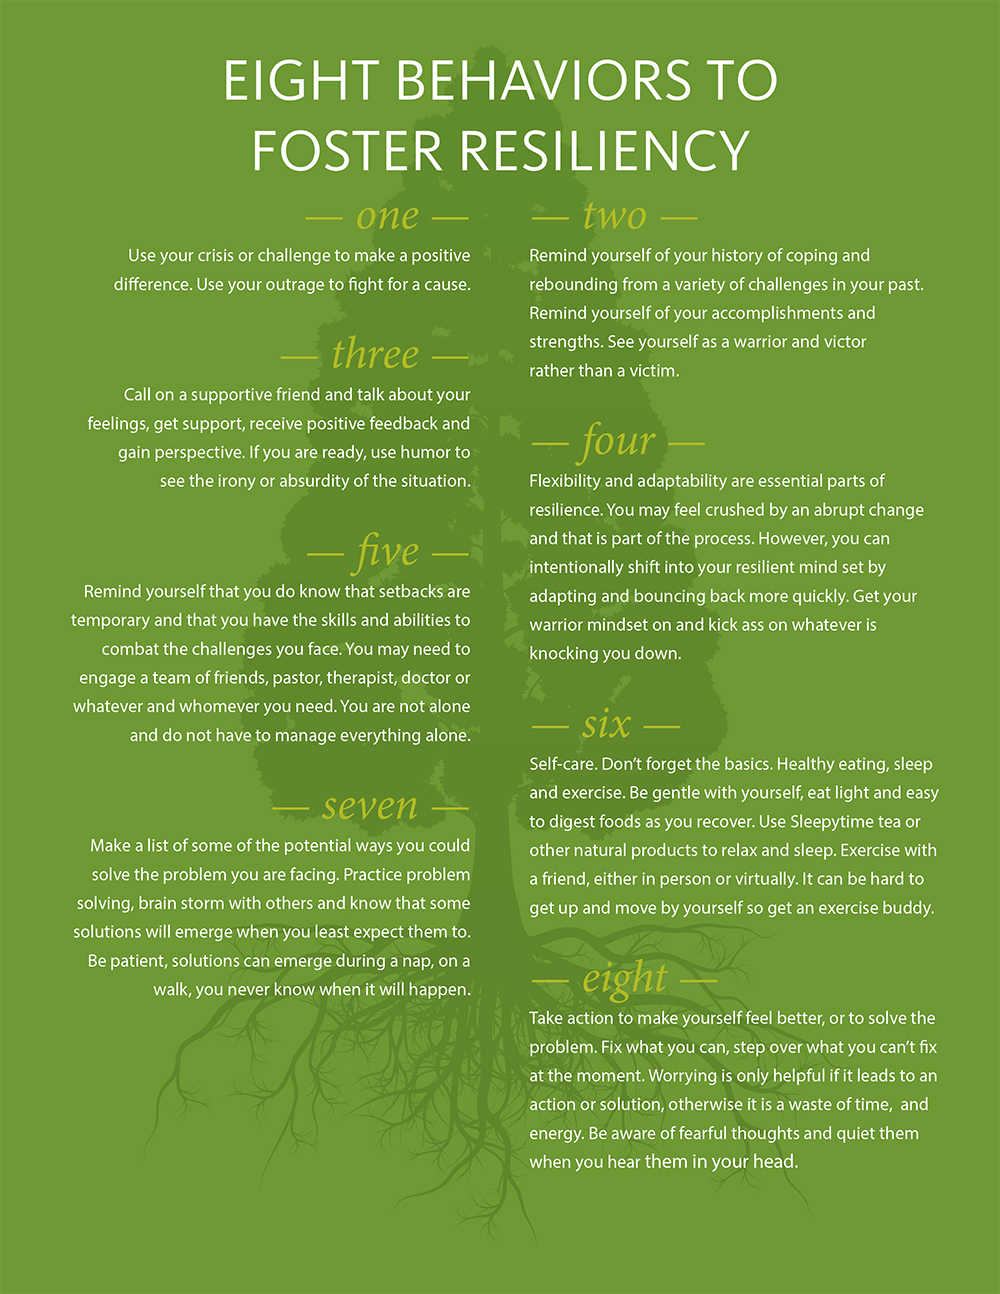 8 Behaviors to Foster Resilience